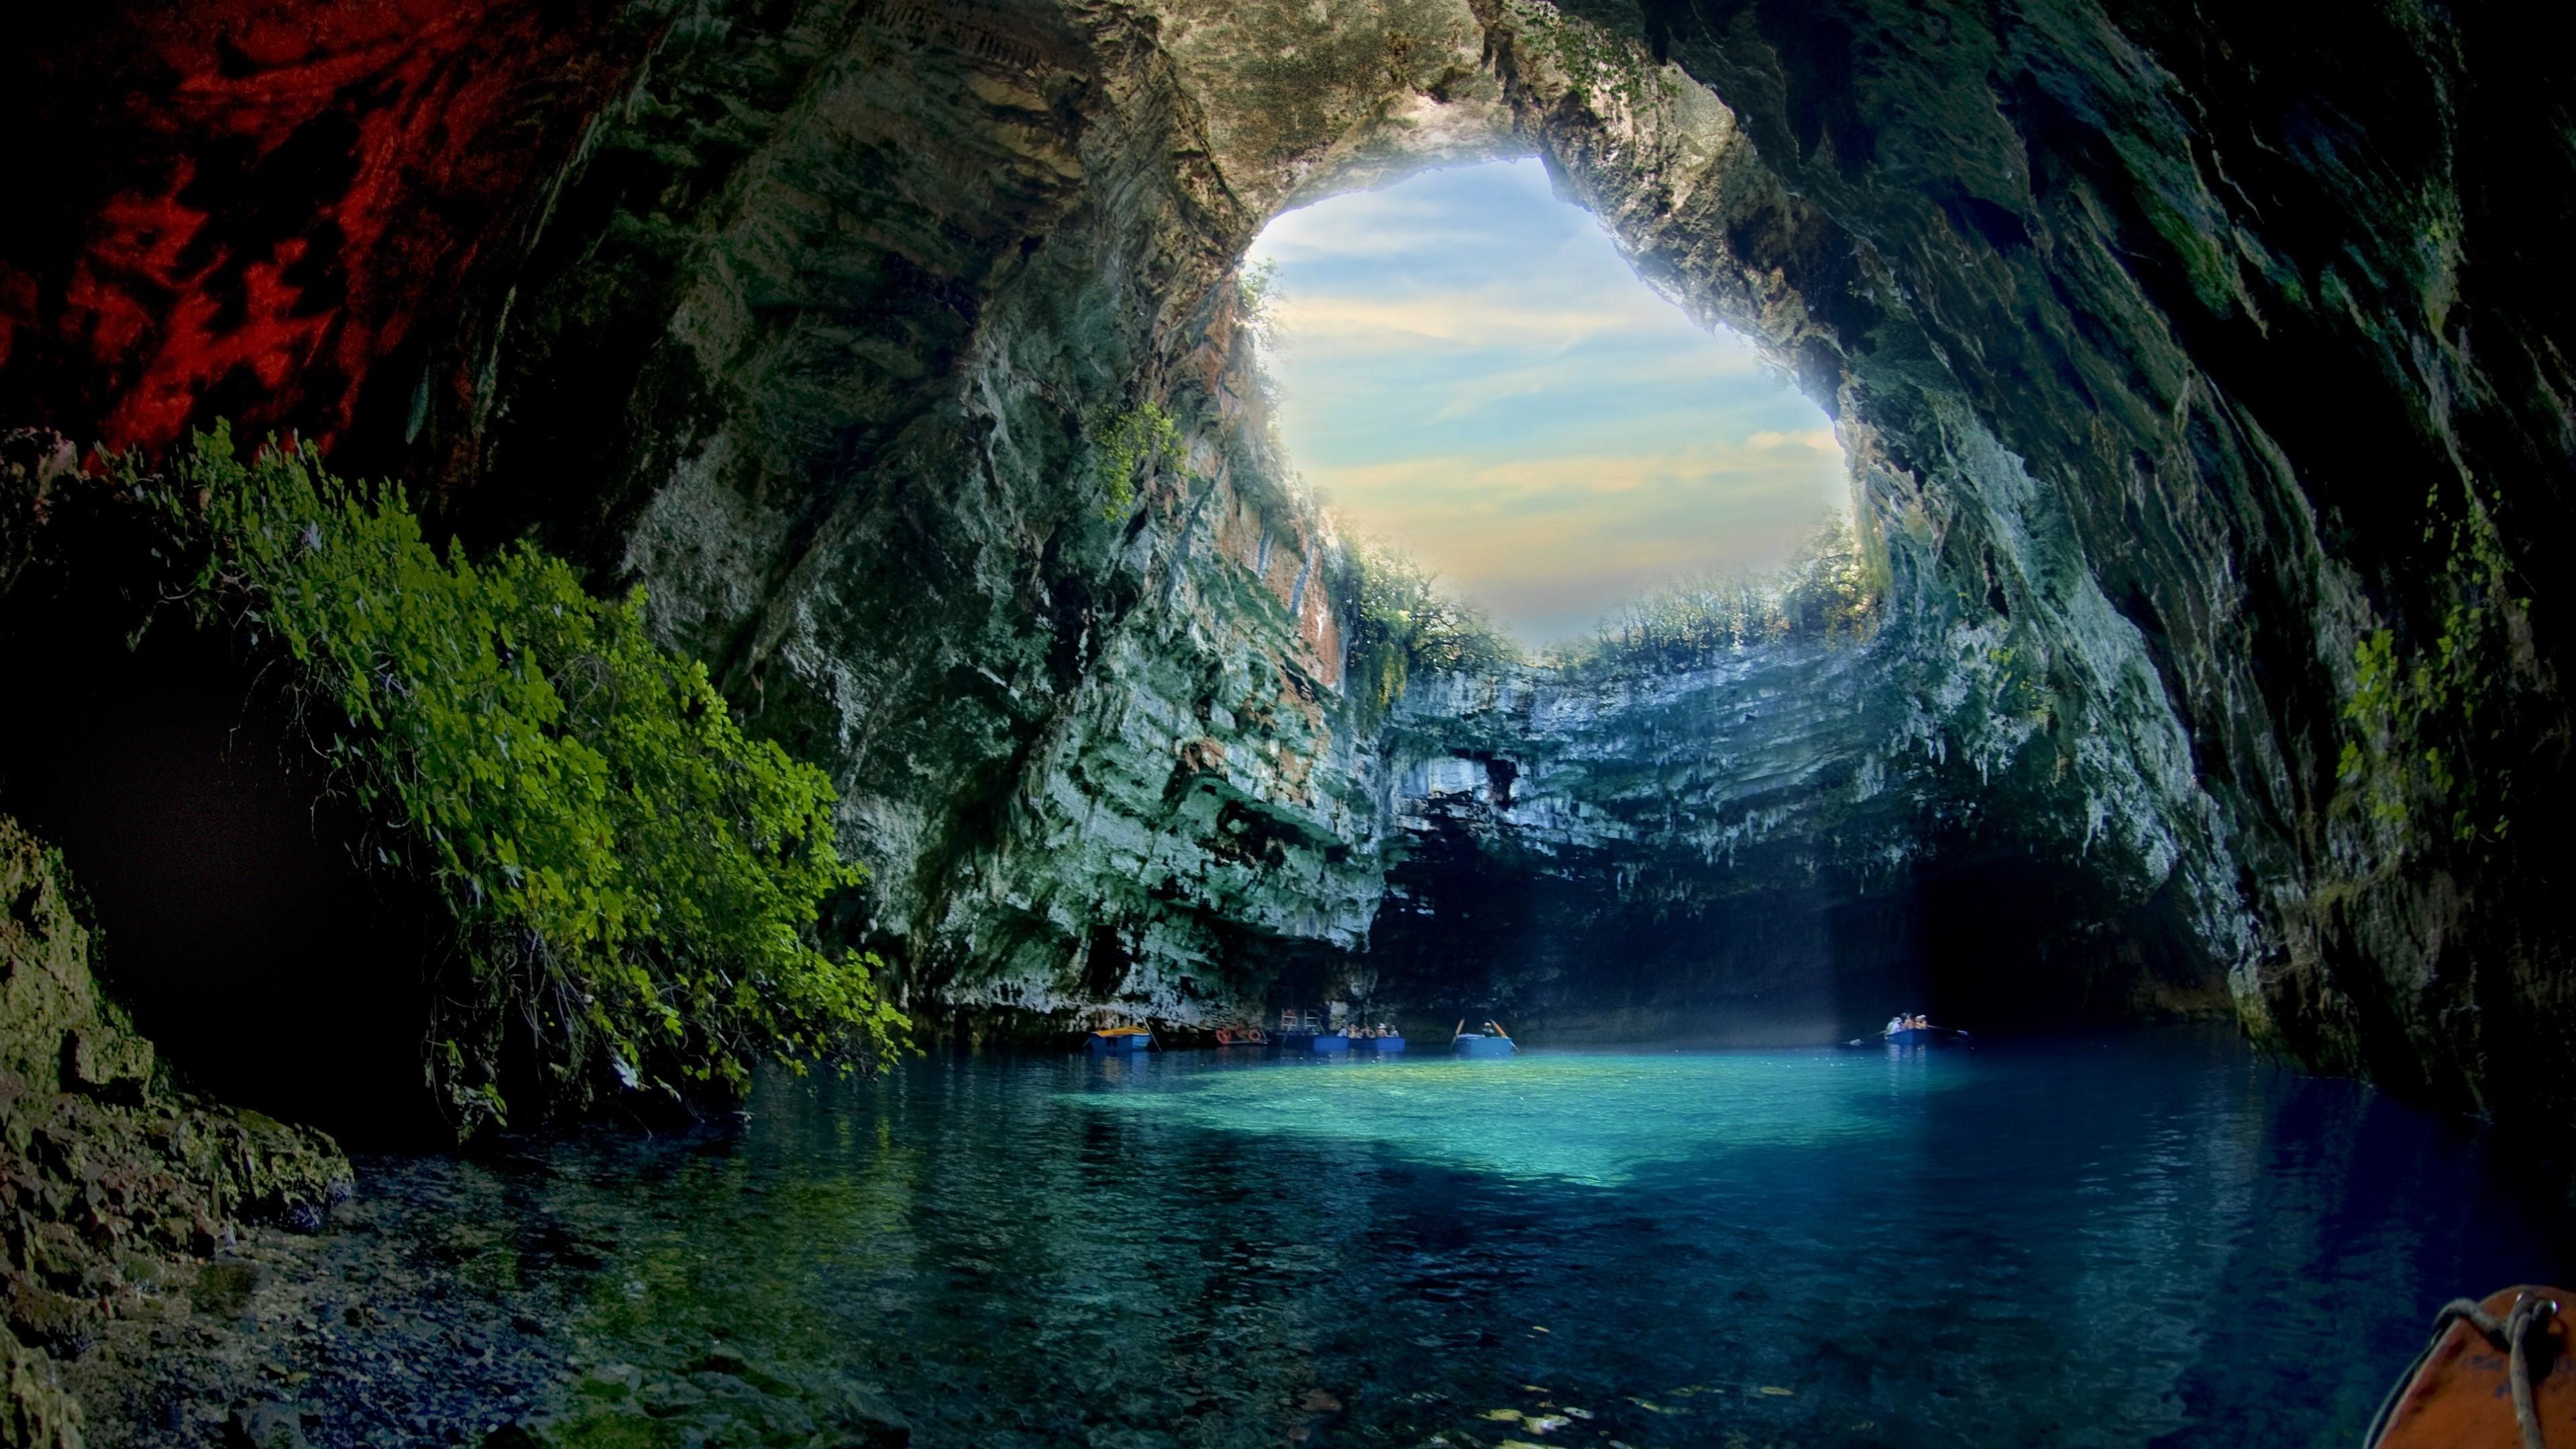 3840x2160, Lake Melissani Cave Wallpaper - Cave Background Hd , HD Wallpaper & Backgrounds